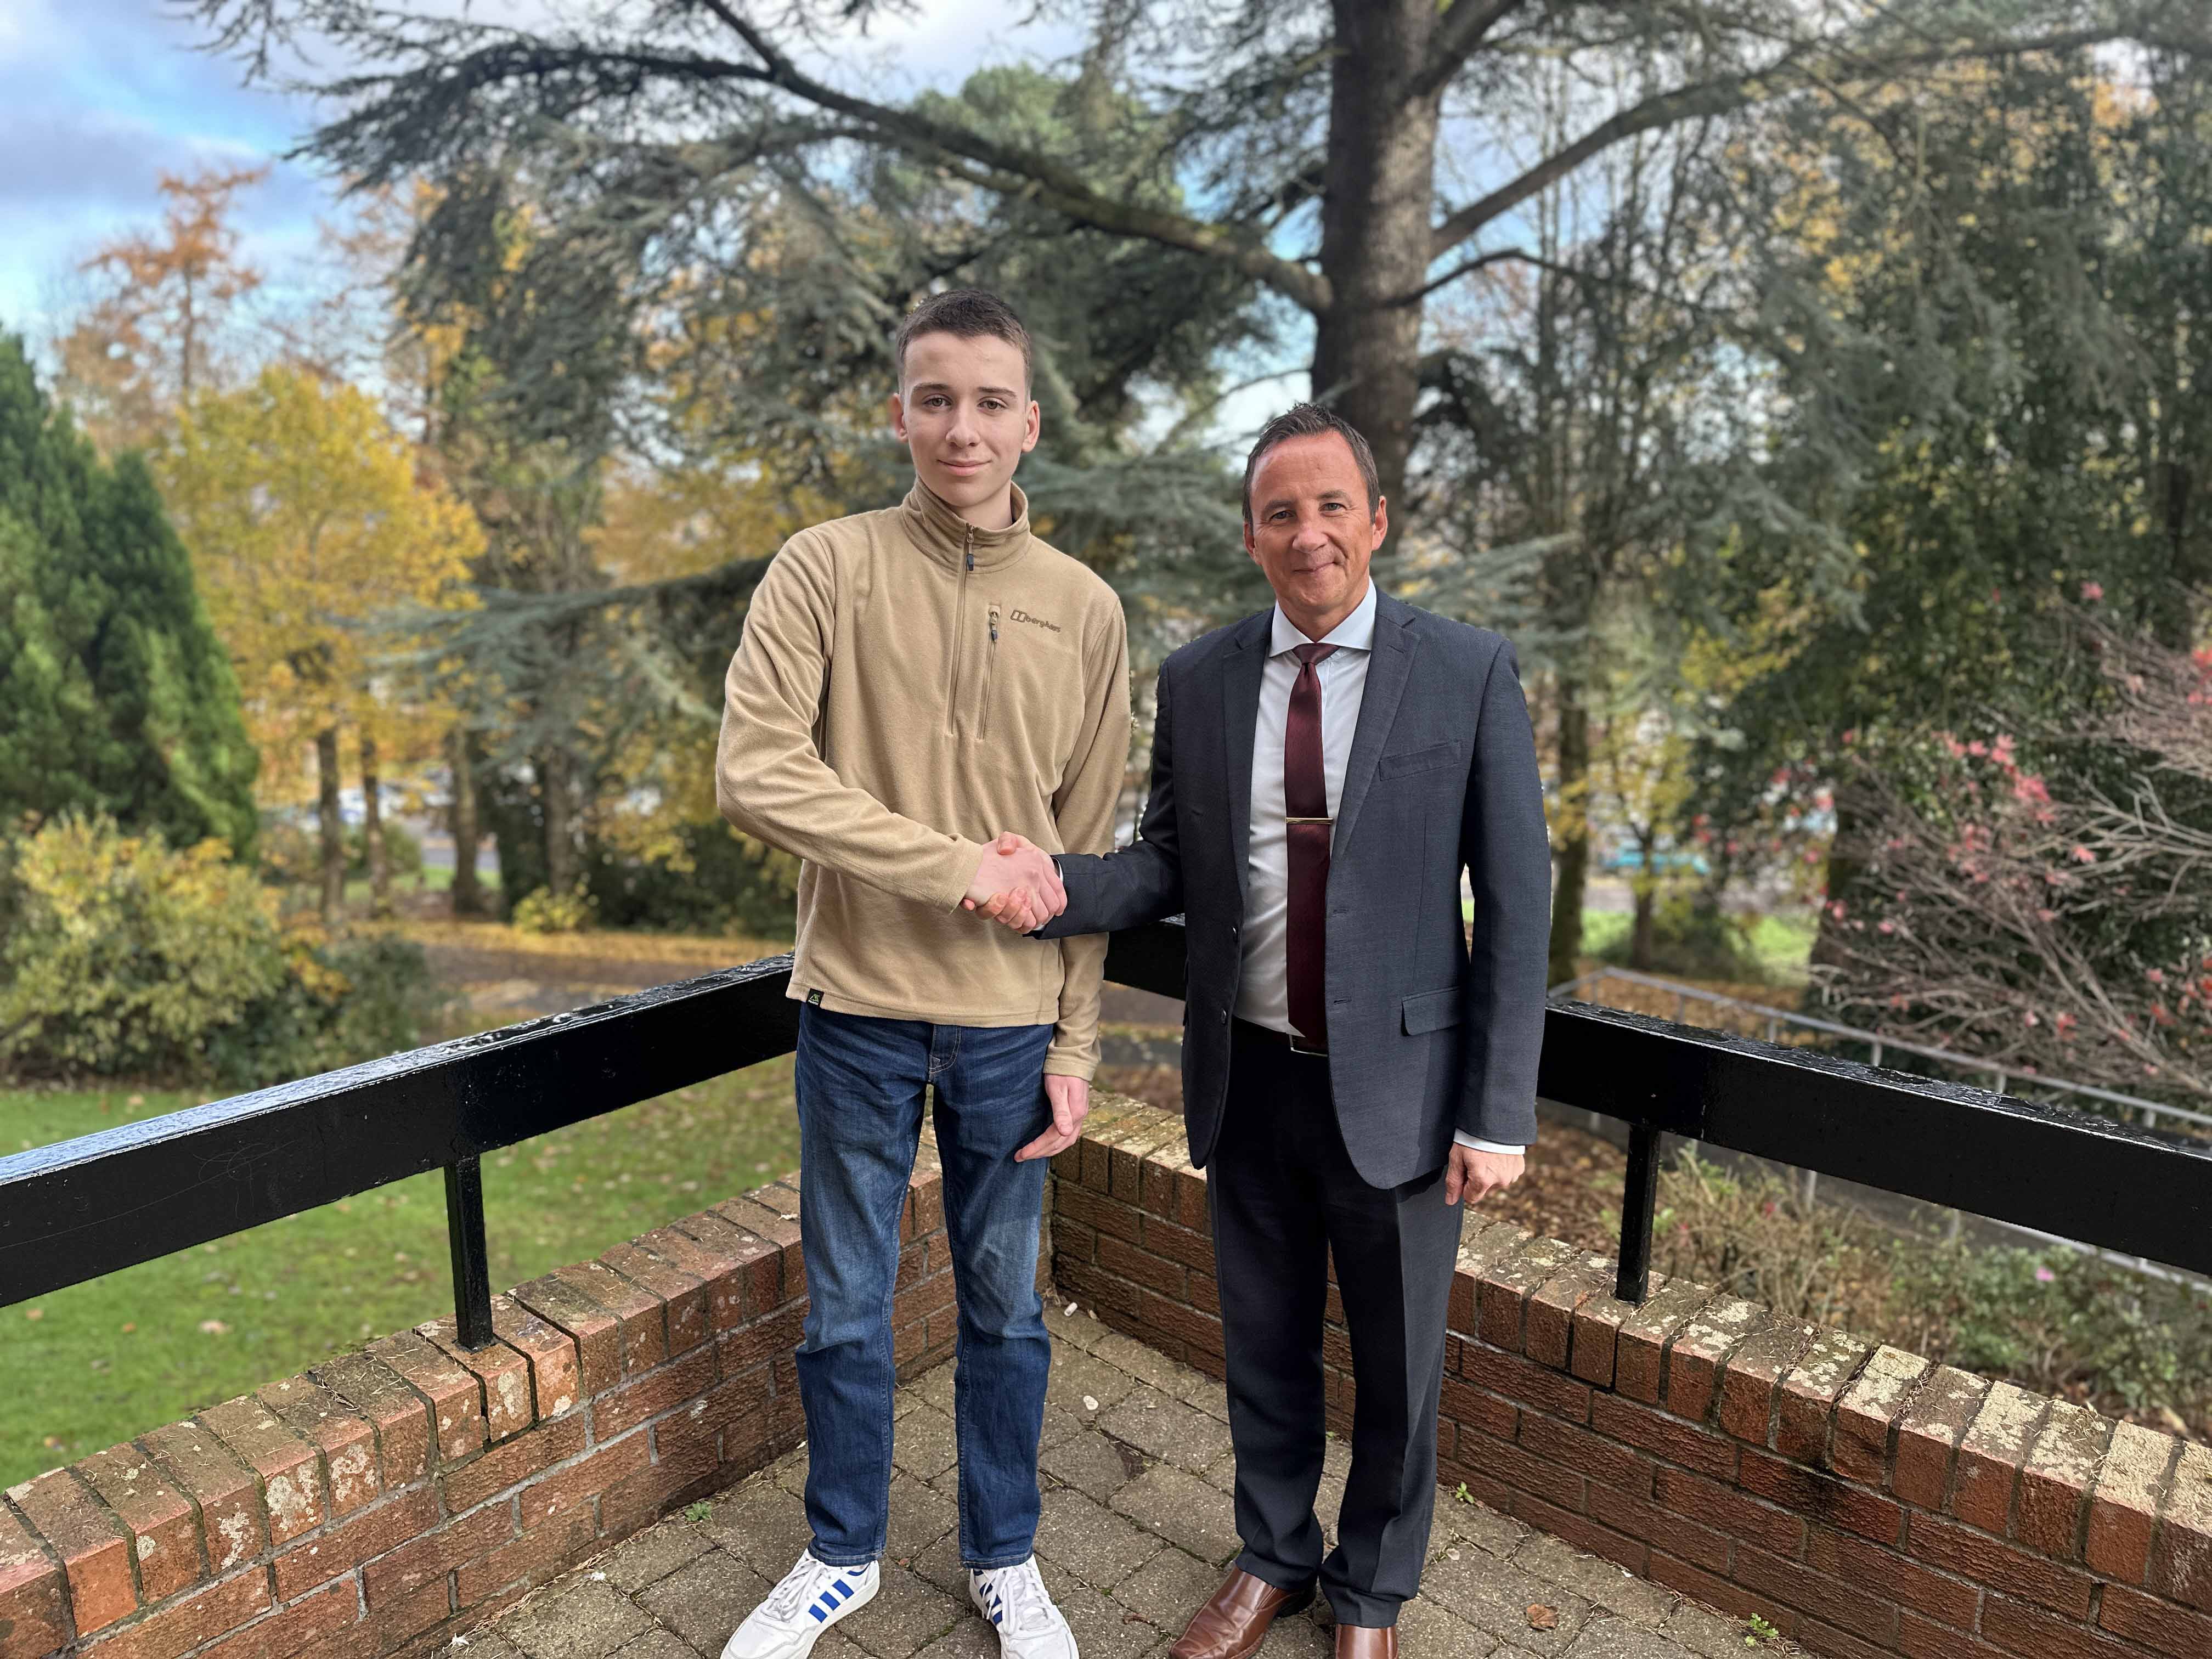 Scholarship award winner benefits from local business support